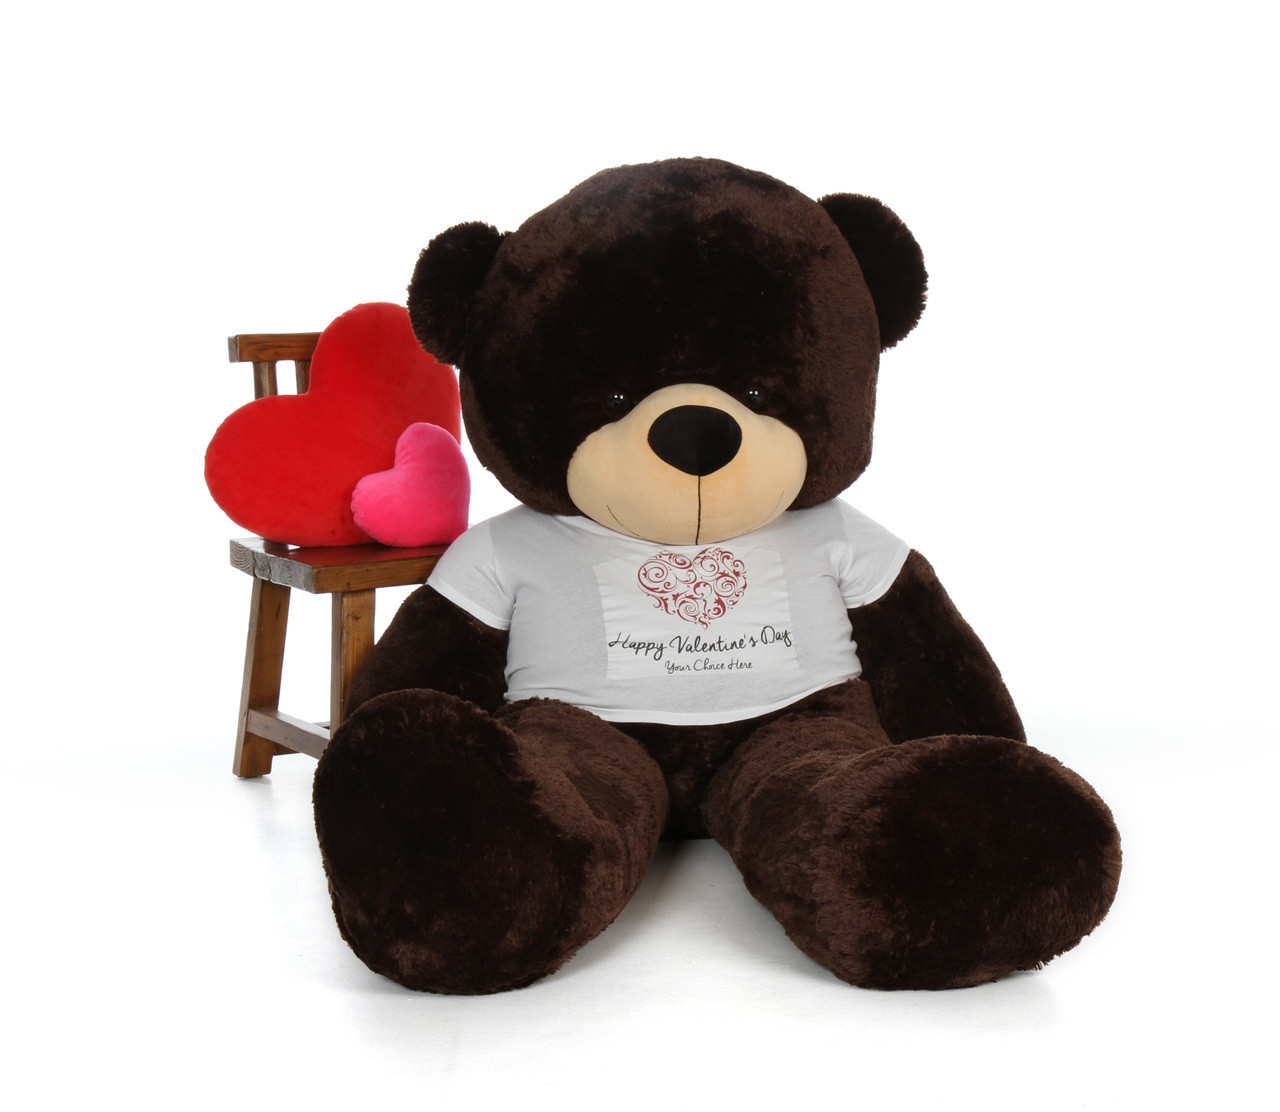 6ft Life Size Happy Valentine’s Day Teddy Bears – Customize your fur color and ...1280 x 1112